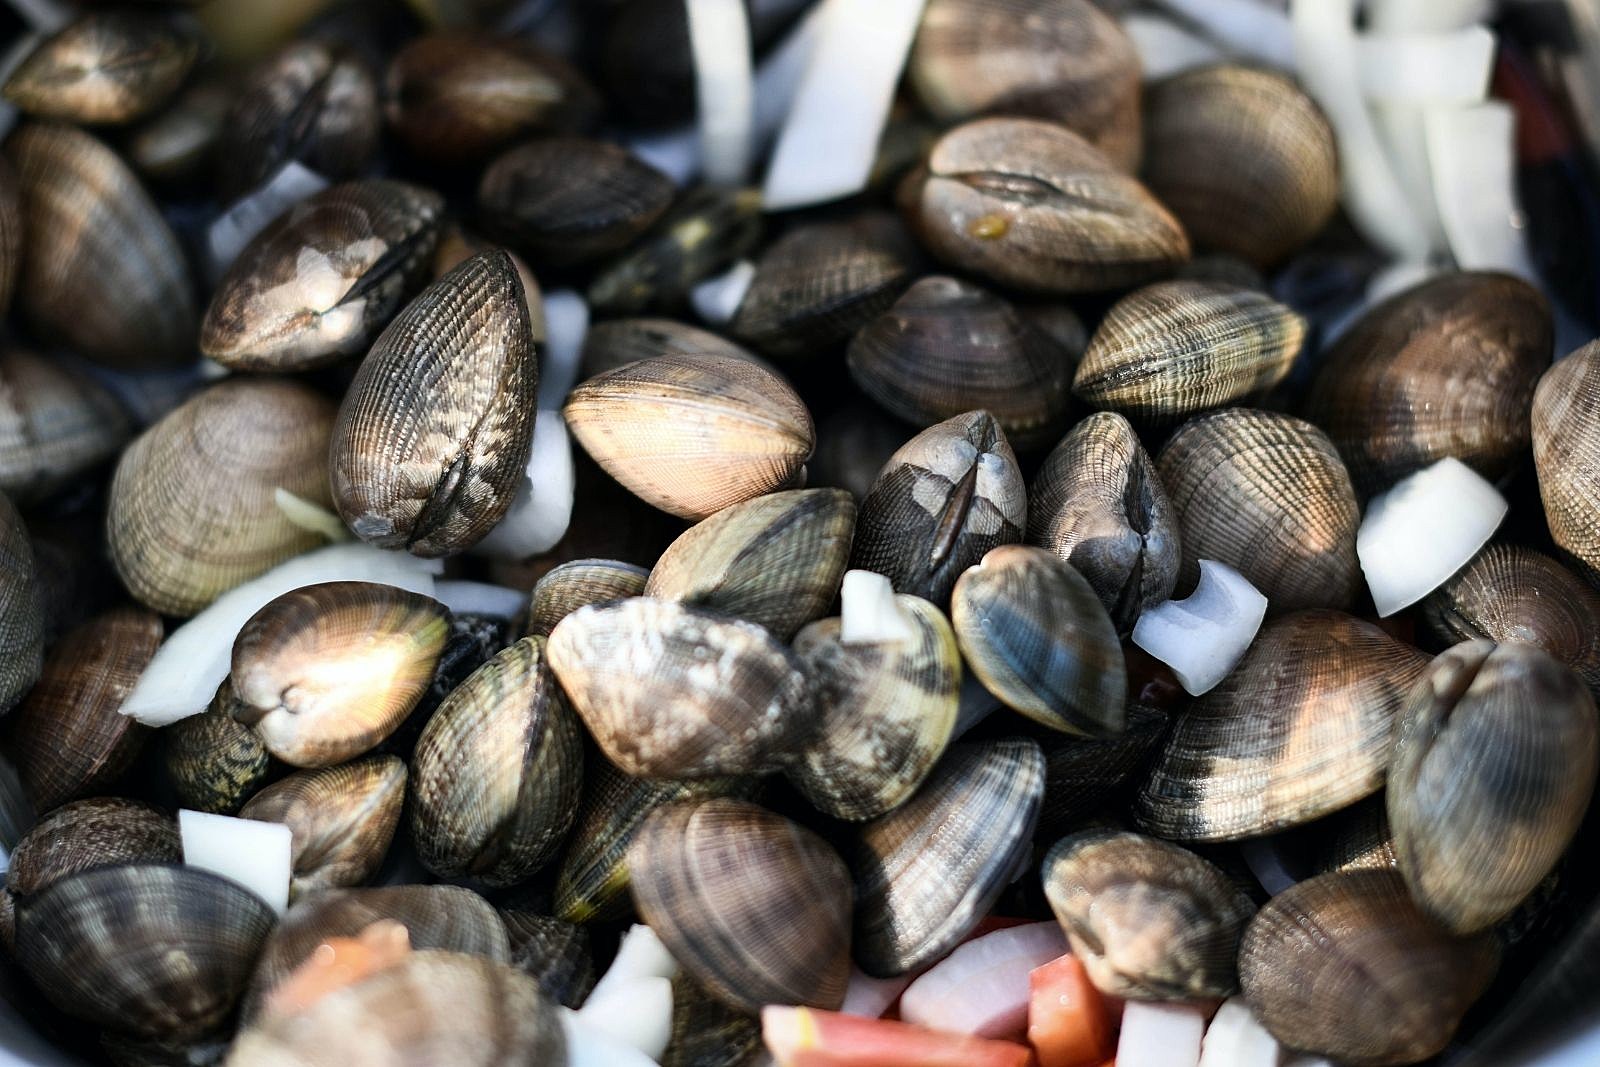 Shuck Yeah! Yarmouth Clam Festival is Returning in Summer 2022